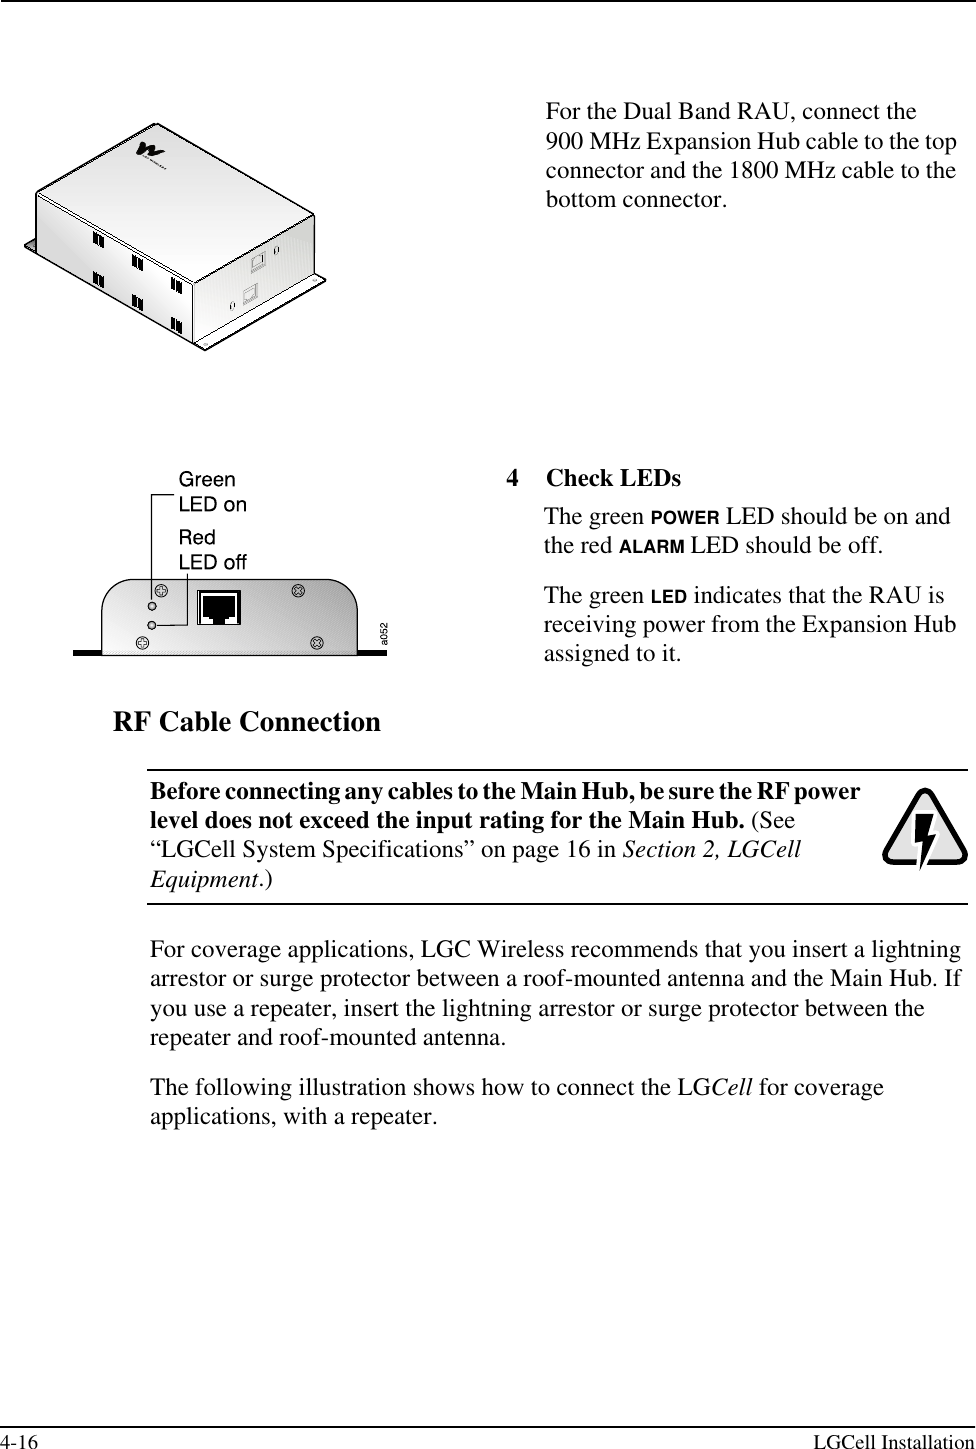 4-16 LGCell InstallationRF Cable ConnectionBefore connecting any cables to the Main Hub, be sure the RF power level does not exceed the input rating for the Main Hub. (See “LGCell System Specifications” on page 16 in Section 2, LGCell Equipment.)For coverage applications, LGC Wireless recommends that you insert a lightning arrestor or surge protector between a roof-mounted antenna and the Main Hub. If you use a repeater, insert the lightning arrestor or surge protector between the repeater and roof-mounted antenna.The following illustration shows how to connect the LGCell for coverage applications, with a repeater.For the Dual Band RAU, connect the 900 MHz Expansion Hub cable to the top connector and the 1800 MHz cable to the bottom connector.4 Check LEDsThe green POWER LED should be on and the red ALARM LED should be off.The green LED indicates that the RAU is receiving power from the Expansion Hub assigned to it.